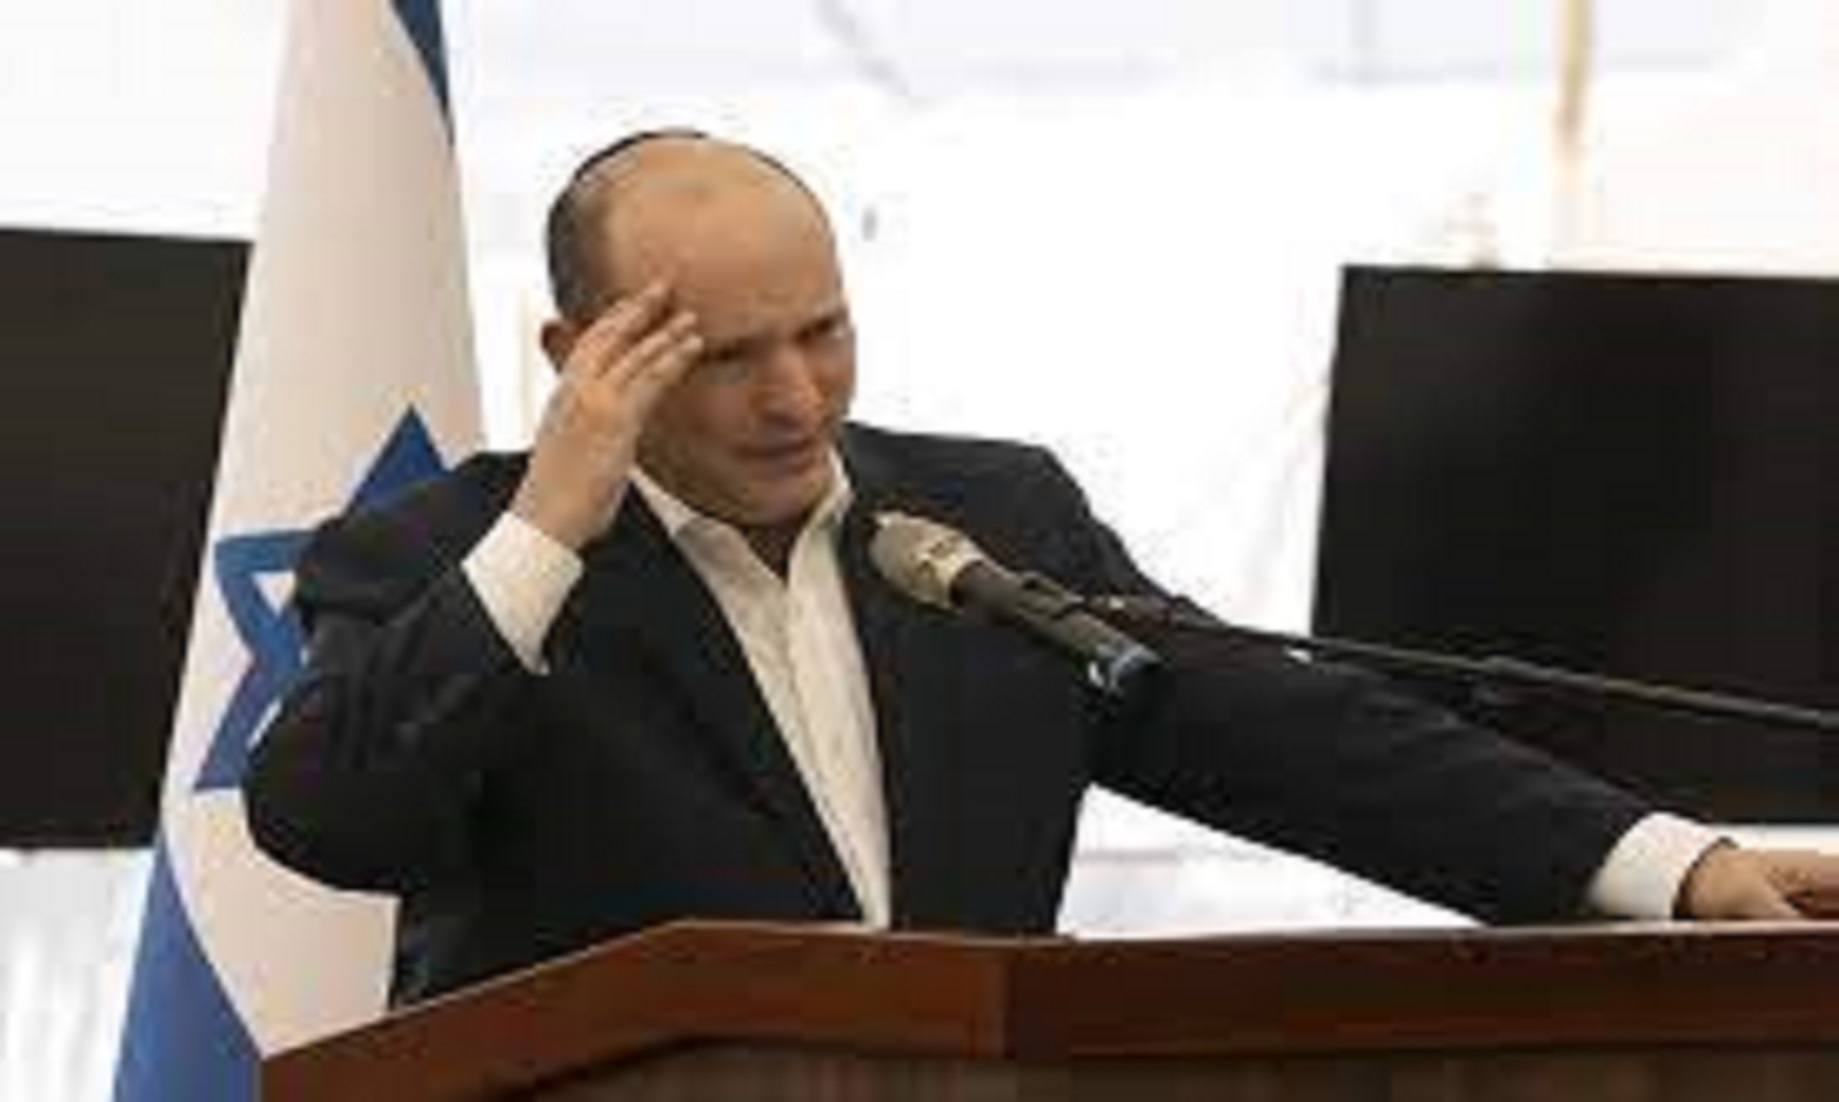 News Analysis: Israeli Gov’t Loses Majority, Stability In Question